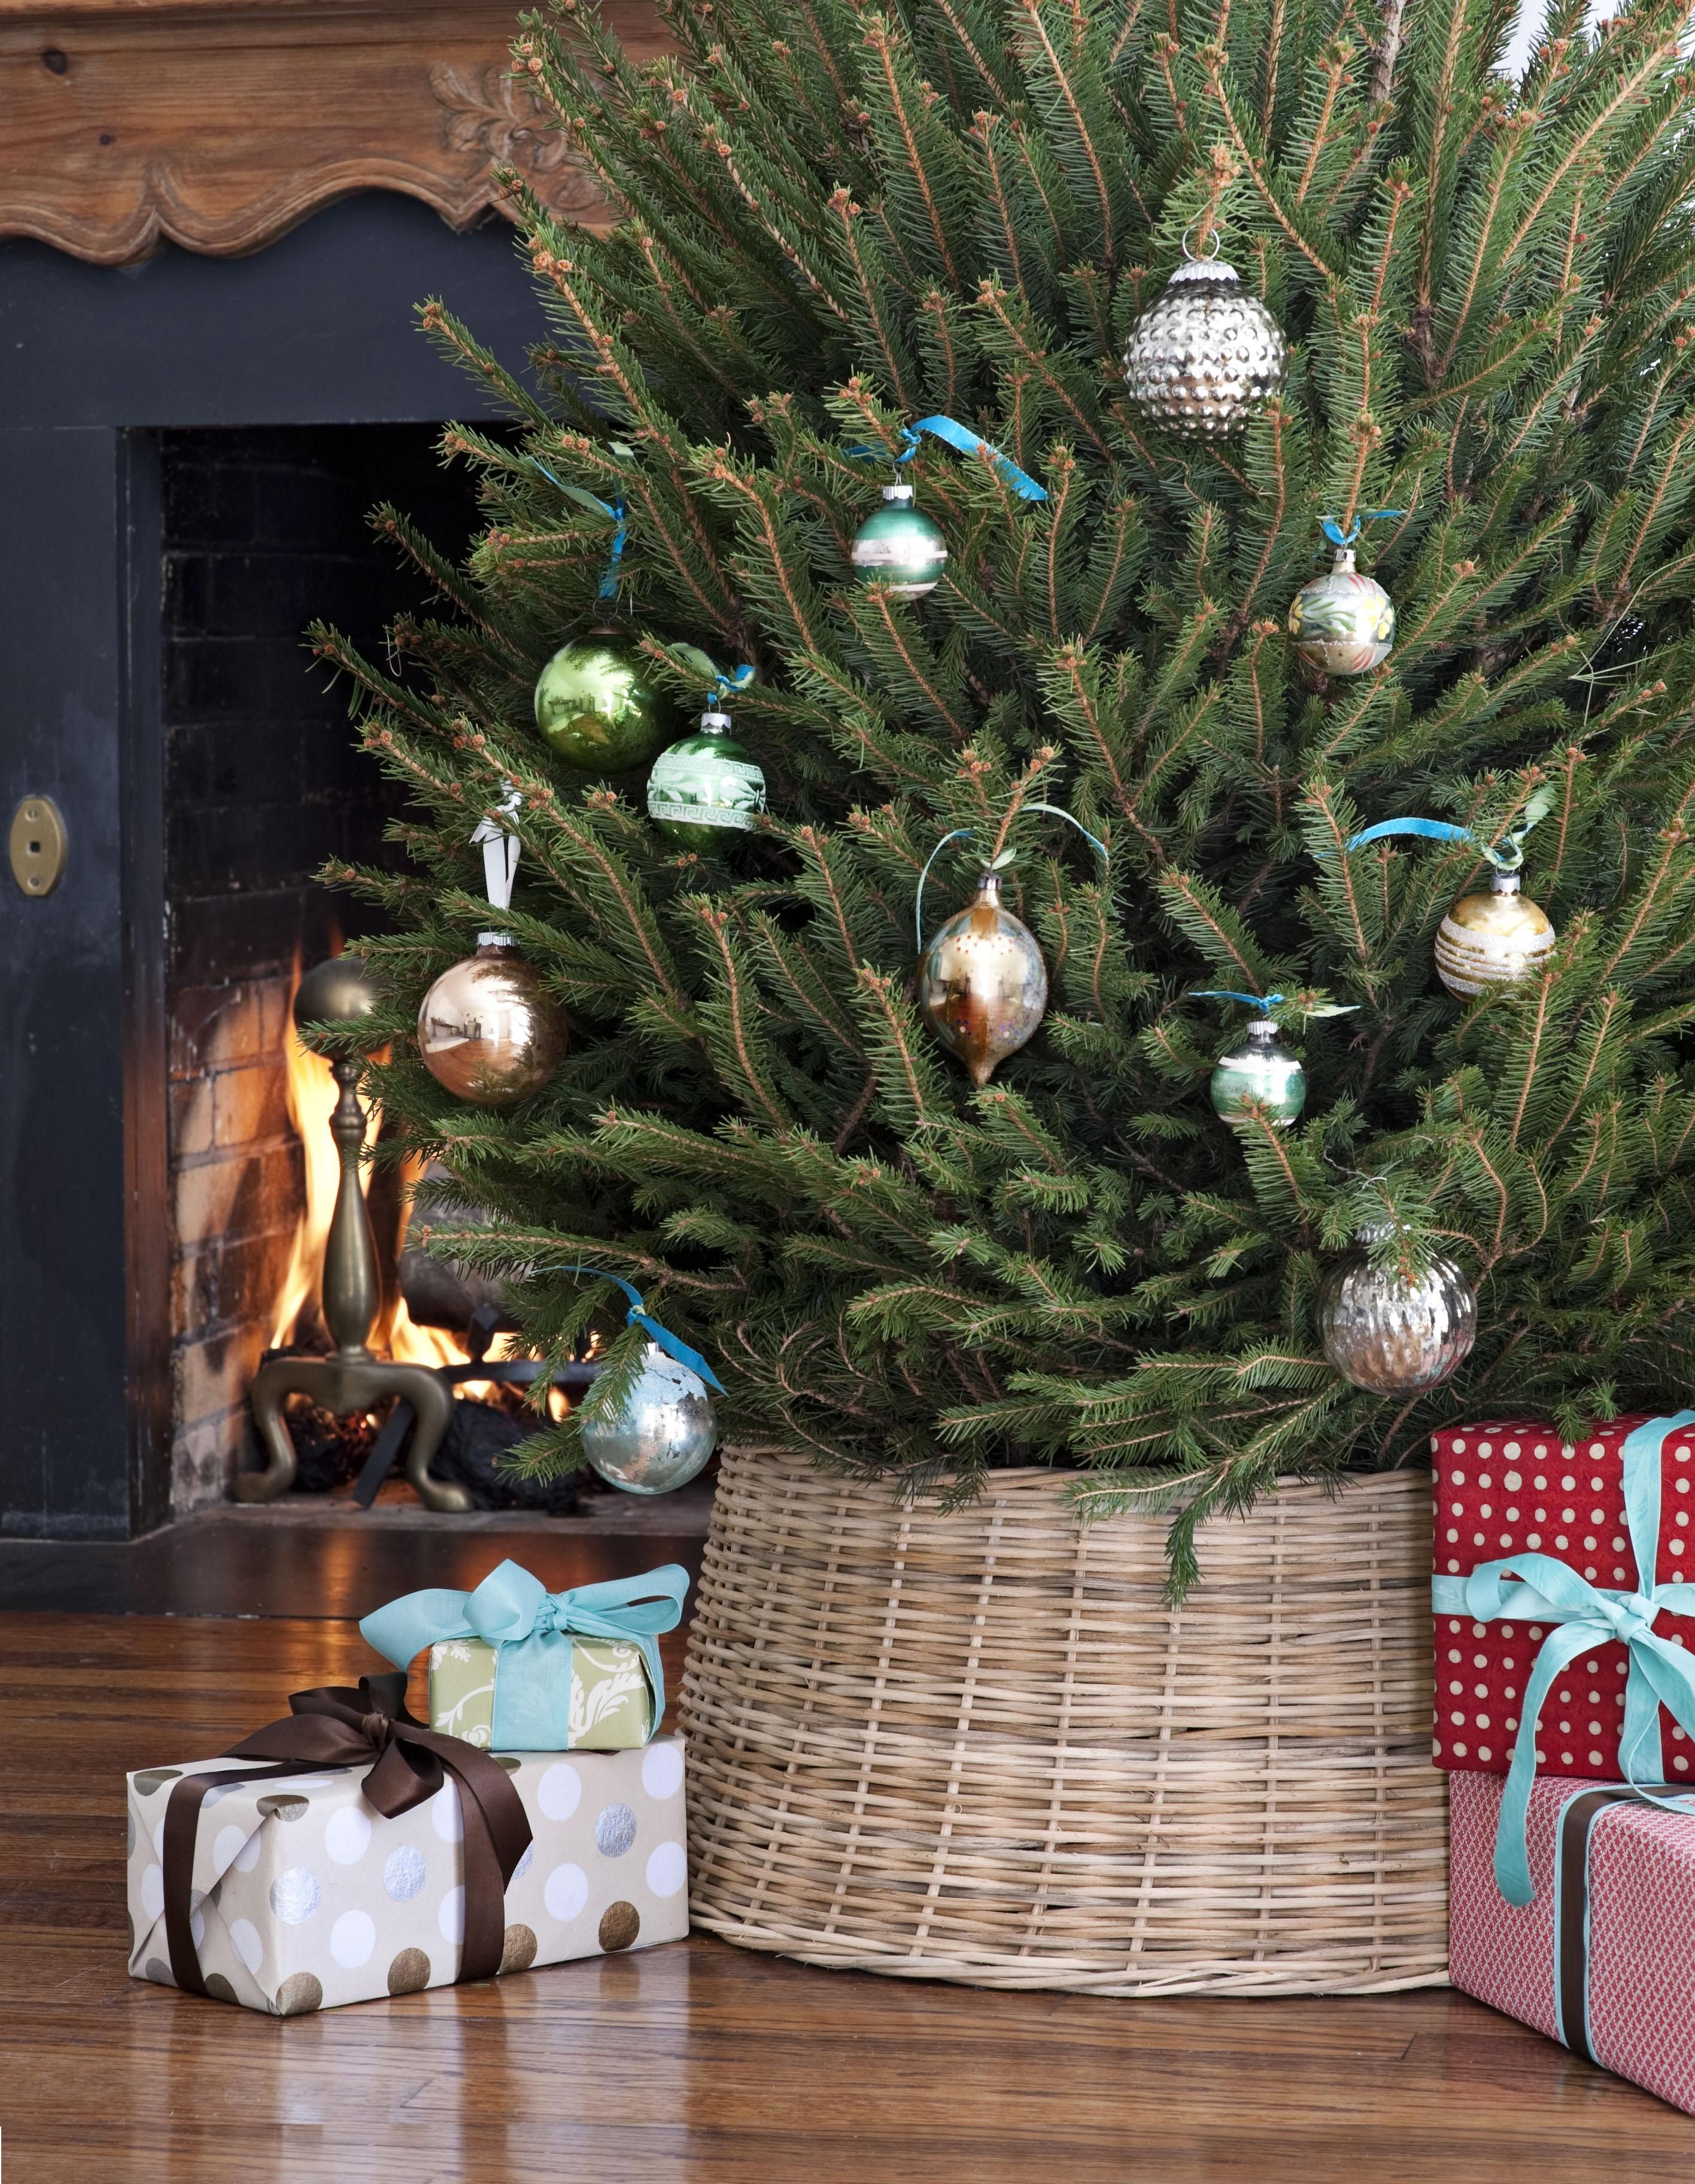 18 Best Christmas Tree Ribbon Ideas - How to Put Ribbon on a Tree